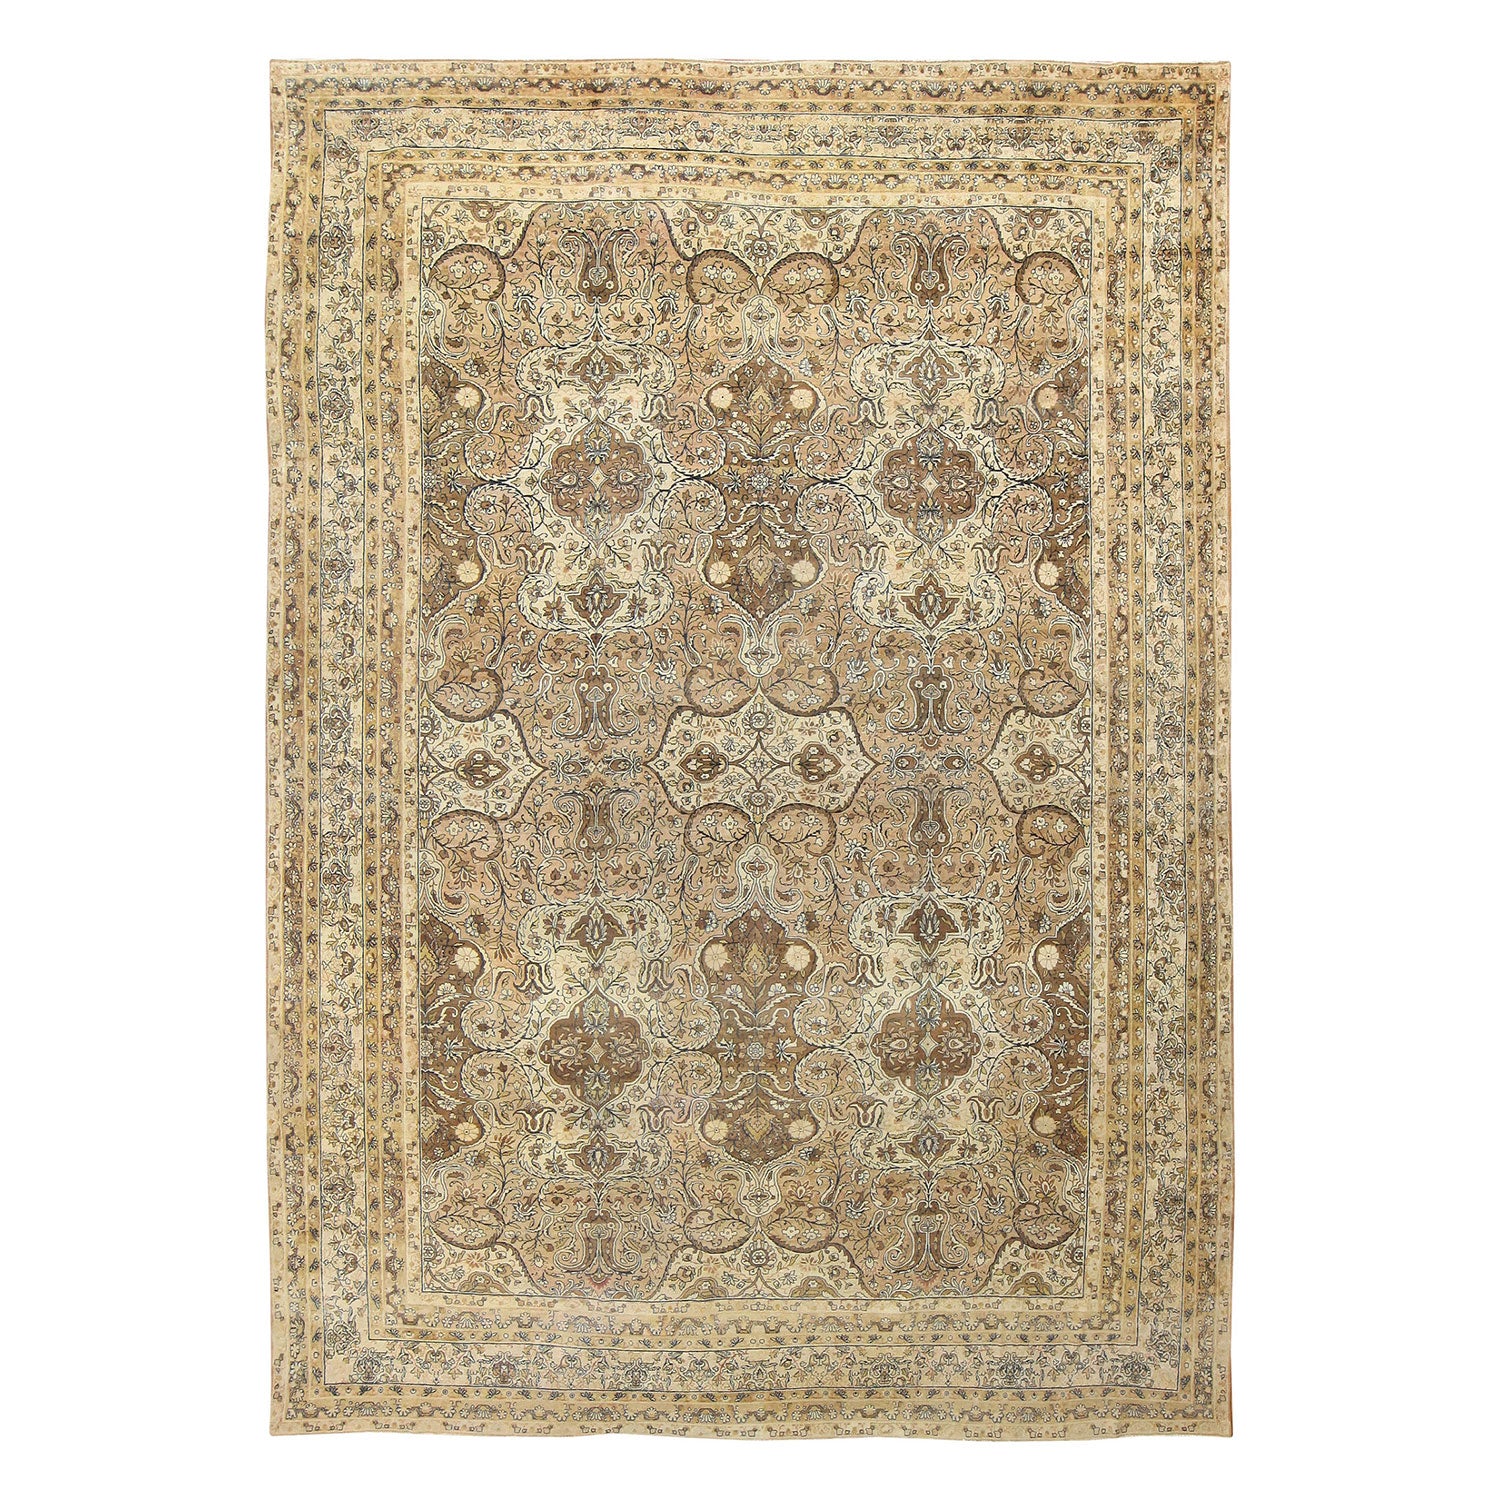 Intricate Persian/Oriental rug showcases stunning symmetrical patterns and exquisite craftsmanship.